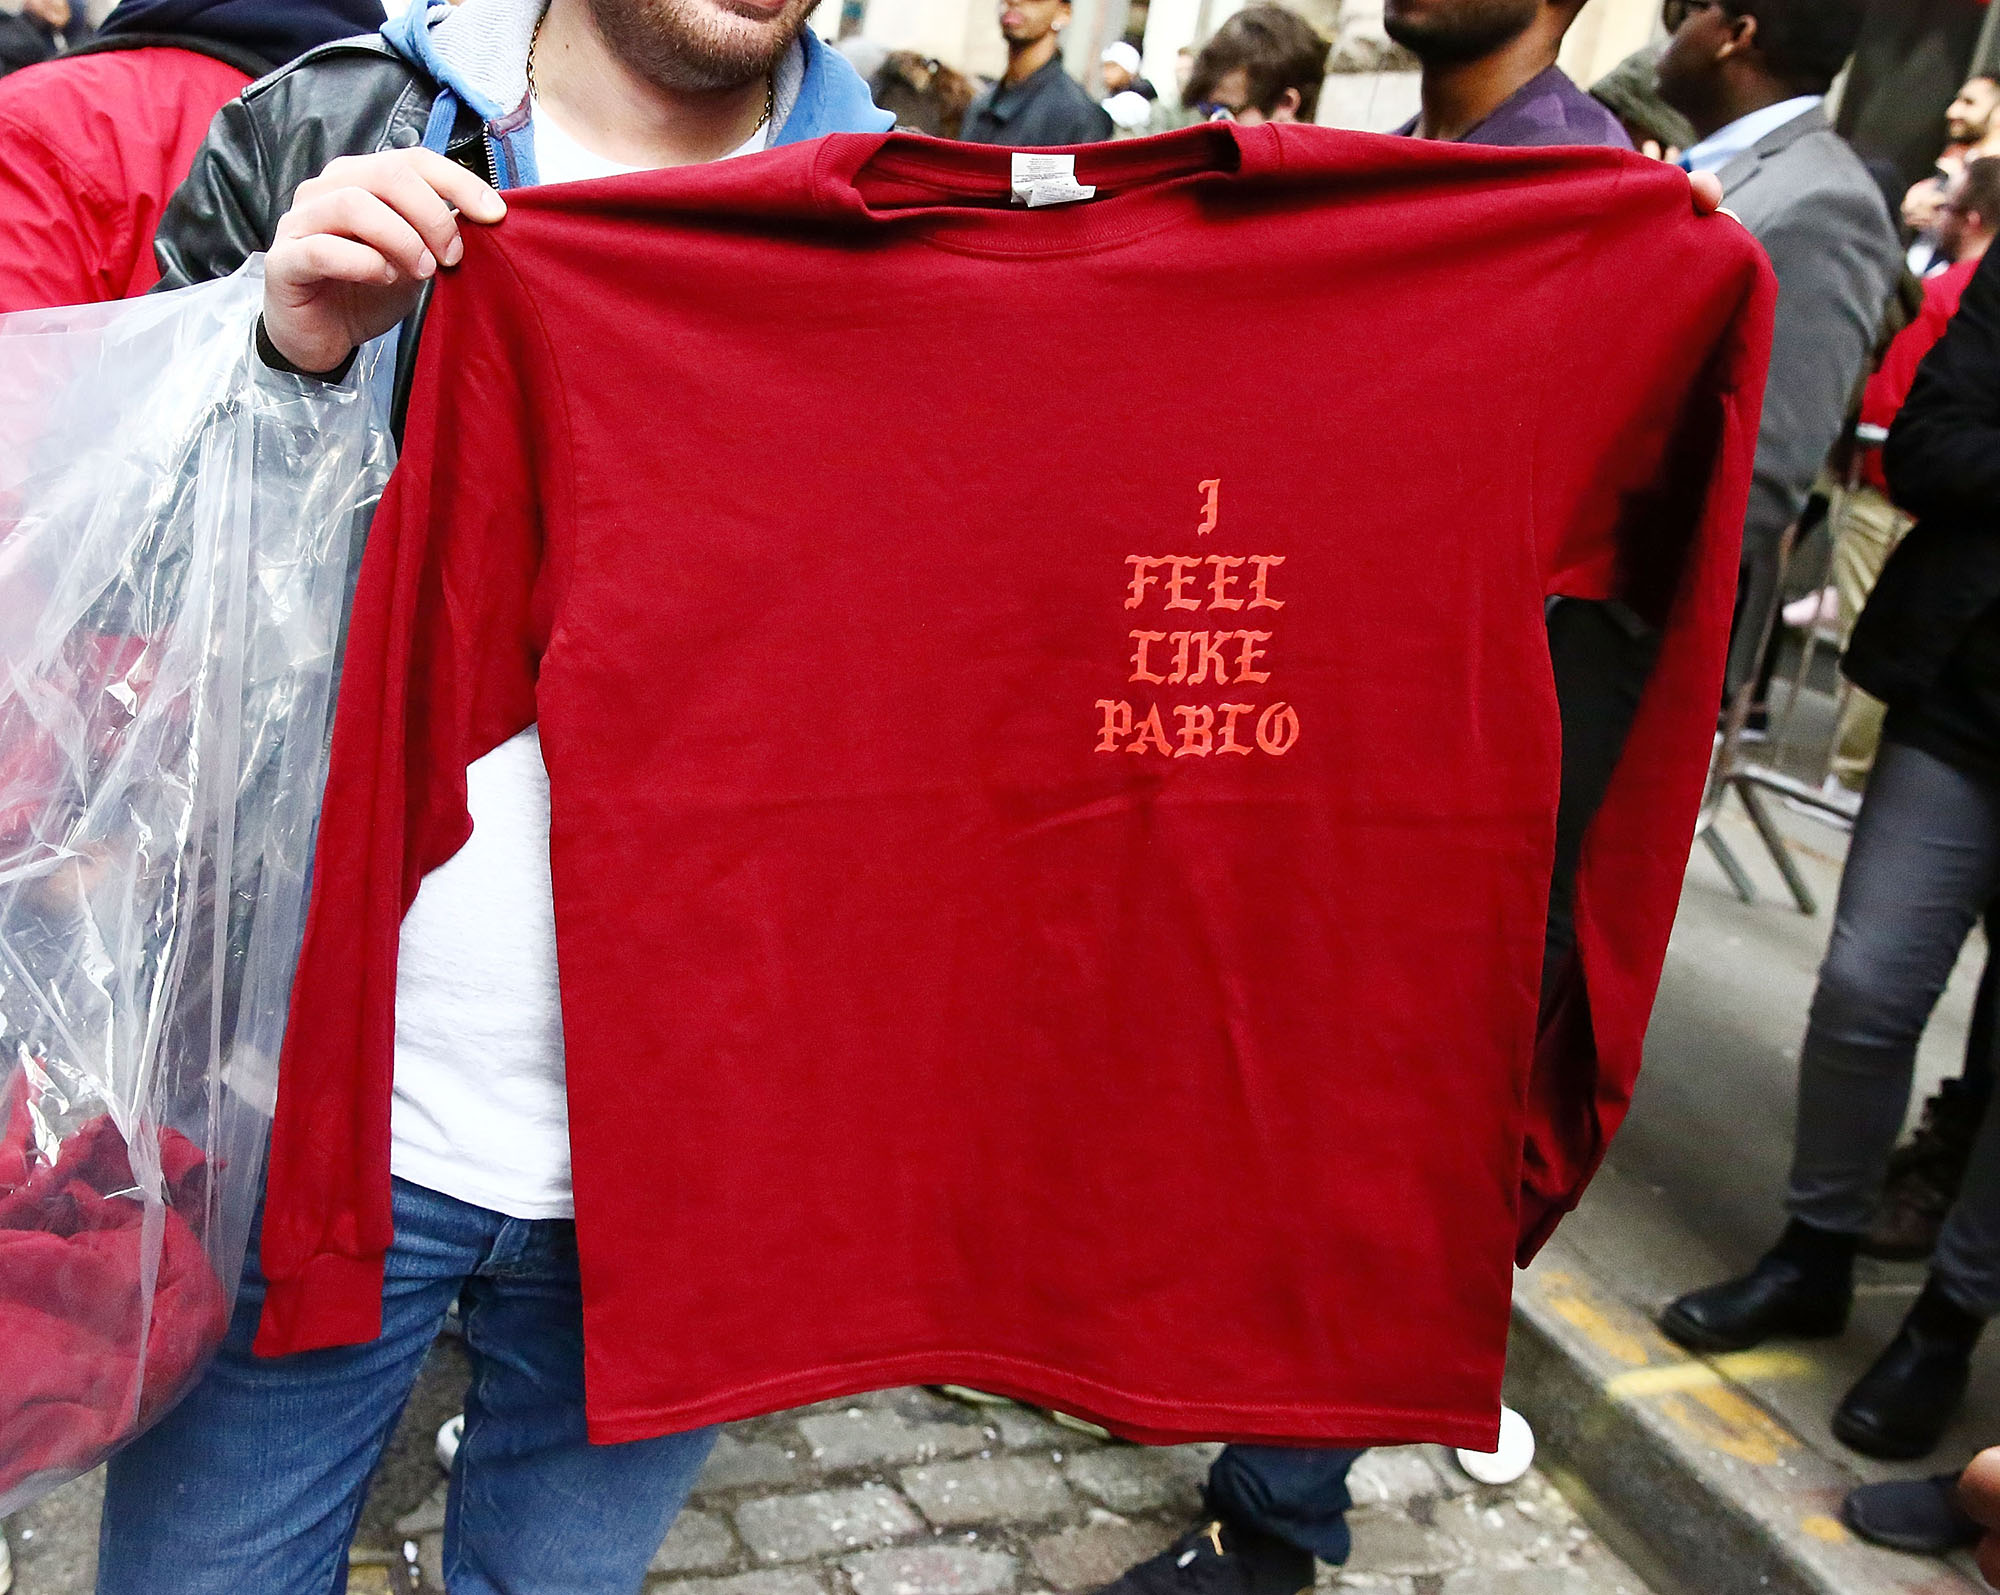 Shirts designed by Kanye West are displayed outside 83 Wooster Street in Soho at the Kanye West  "Pablo Pop-Up Shop" In Manhattan on March 18, 2016 in New York City.  (Photo by Astrid Stawiarz/Getty Images) (Astrid Stawiarz&mdash;Getty Images)